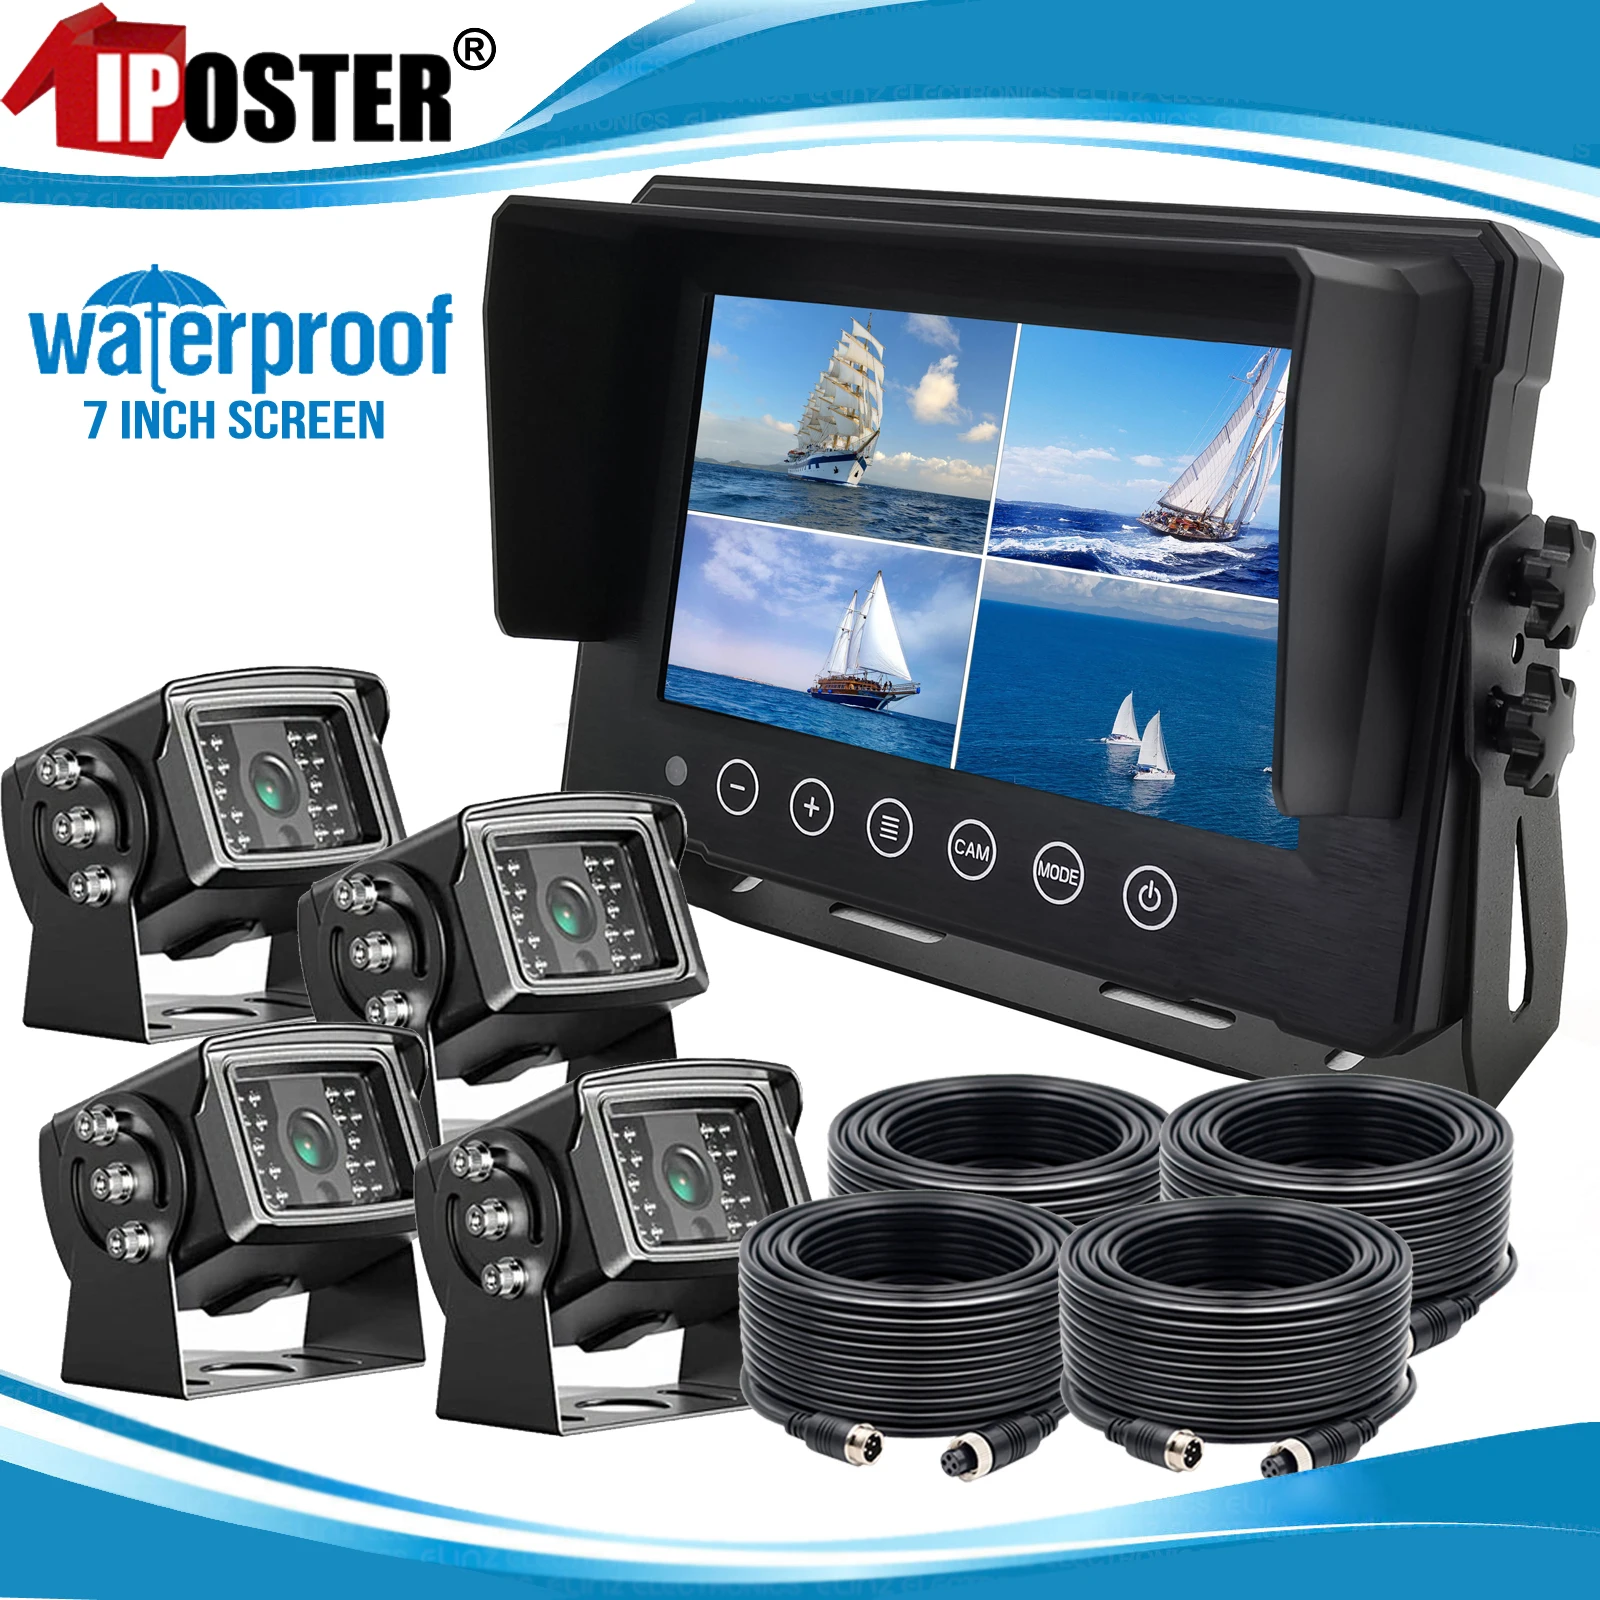 

iPoster 7 inch IPS Screen 4 Channel AHD IP68 Waterproof Monitor With 4x 4PIN AHD 1080P Front Rear Reversing Cameras For Boat